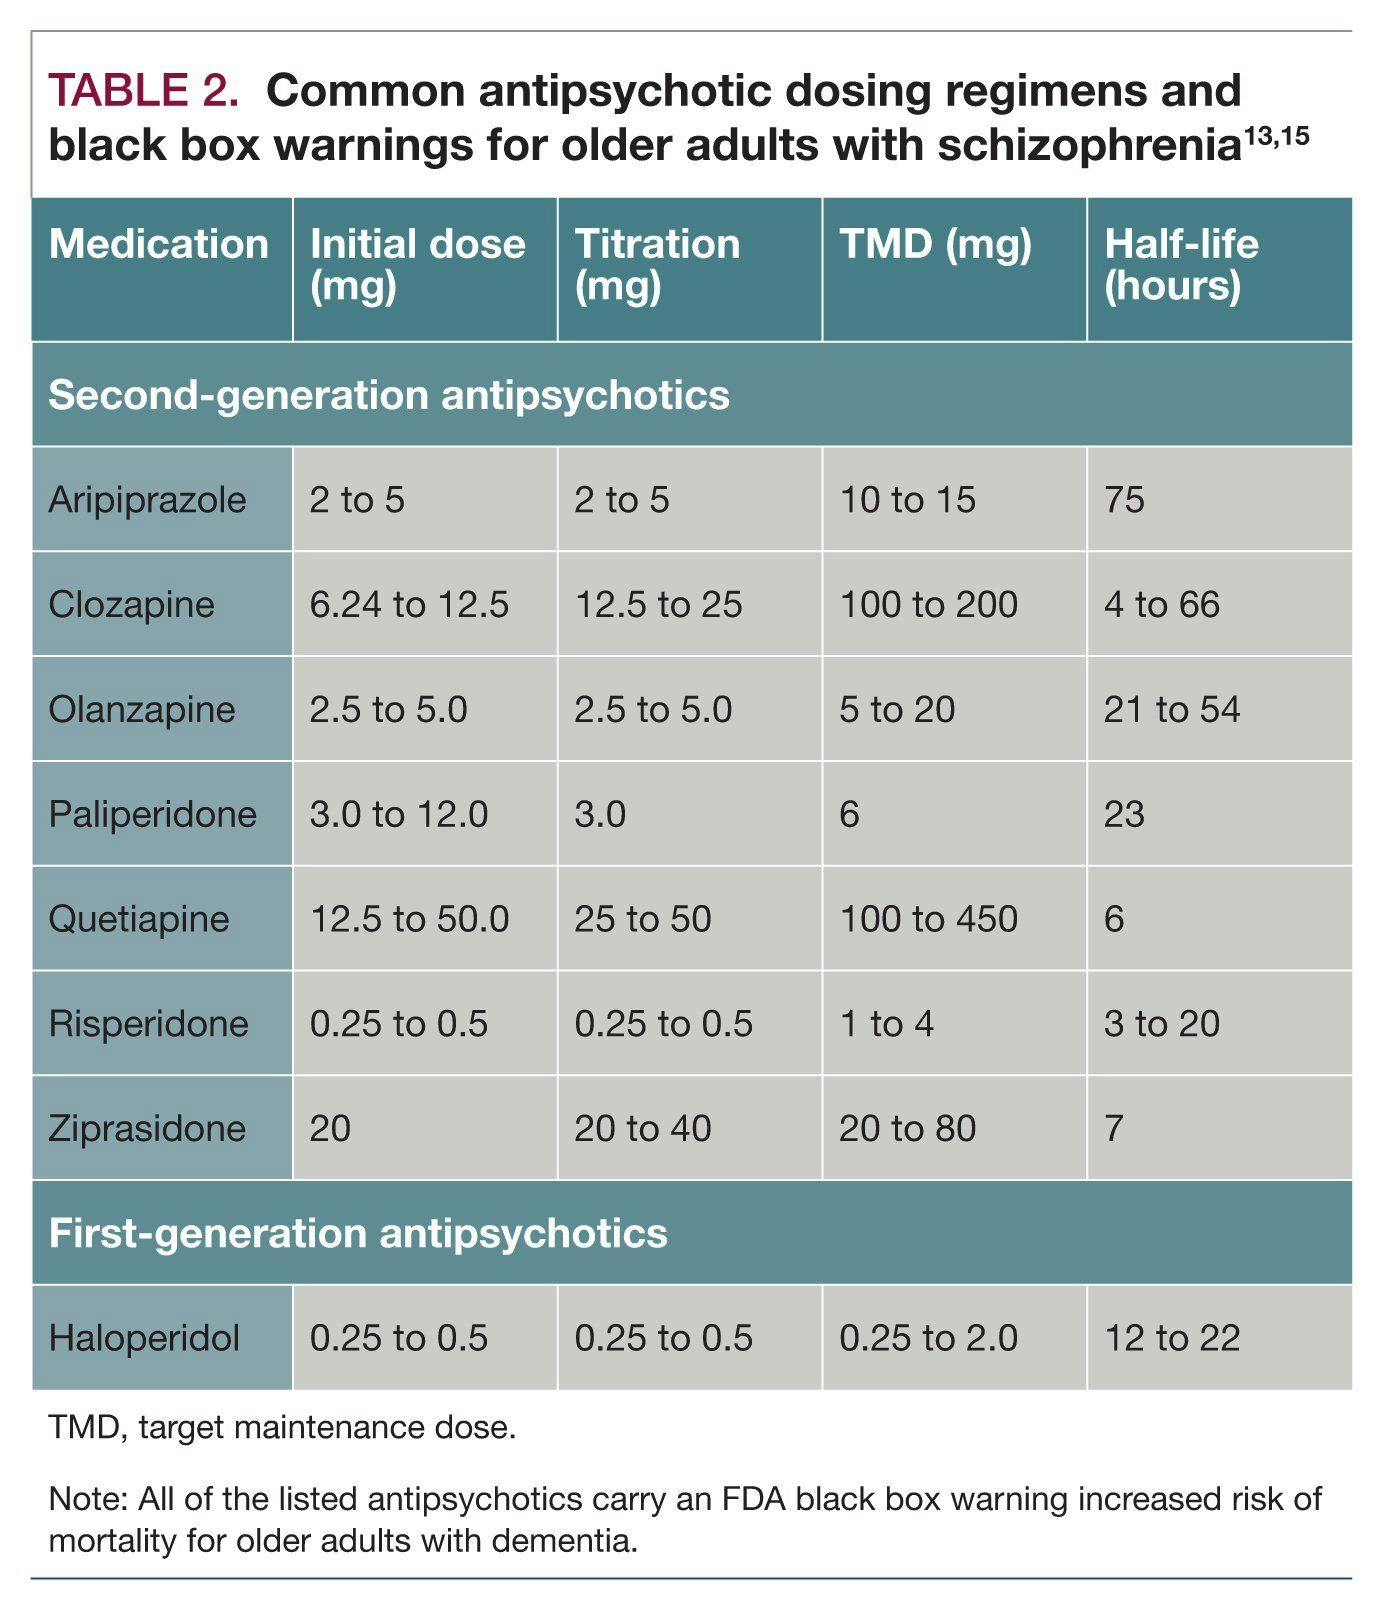 Common antipsychotic dosing regimens and black box warnings for older adults with schizophrenia